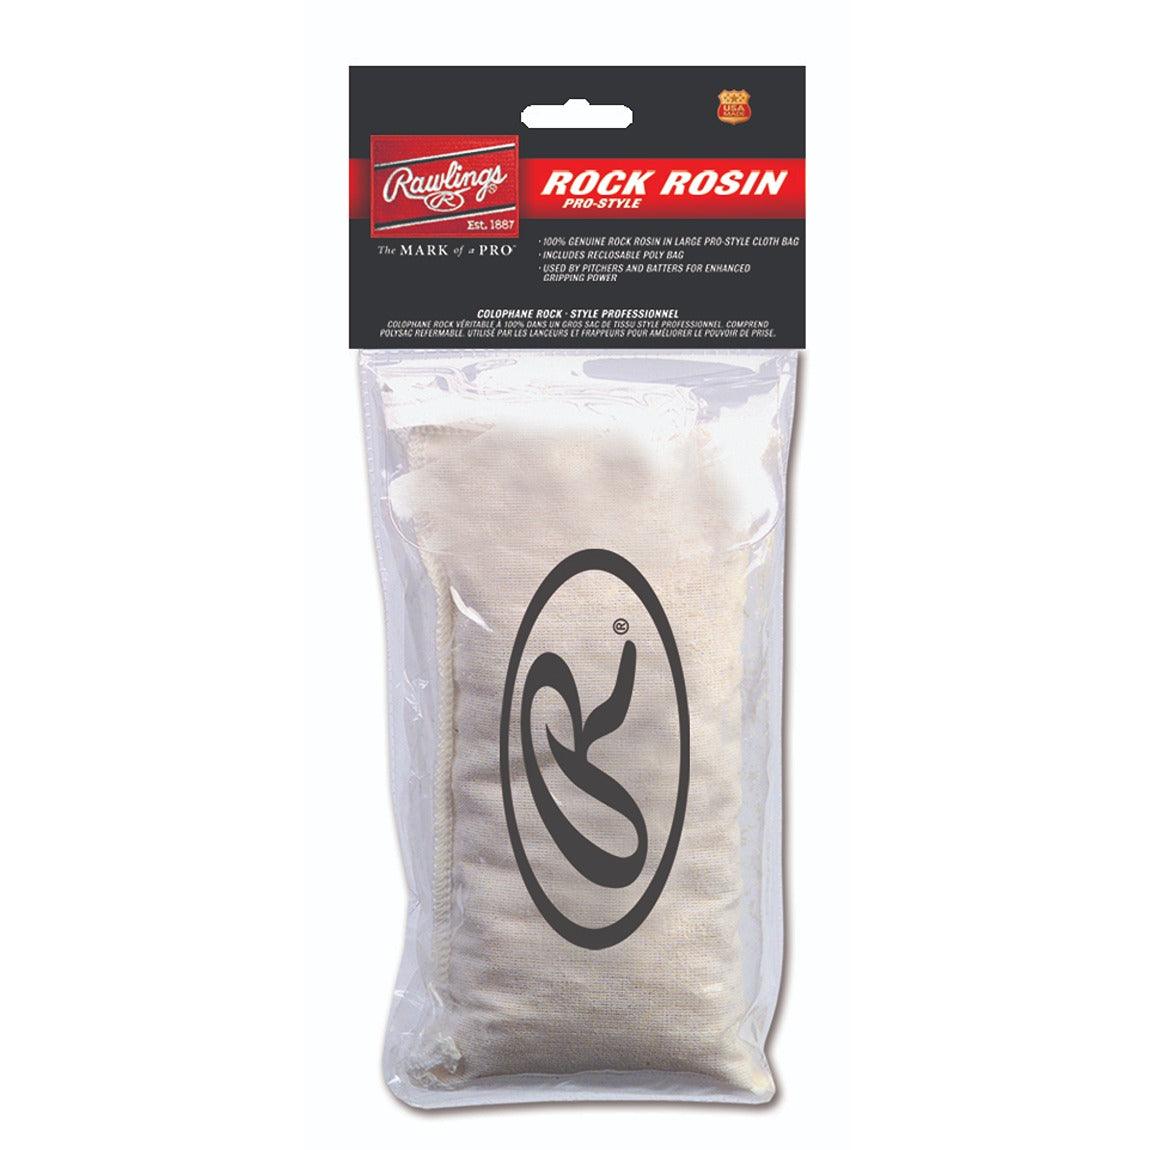 Large Rock Rosin Bag - Sports Excellence